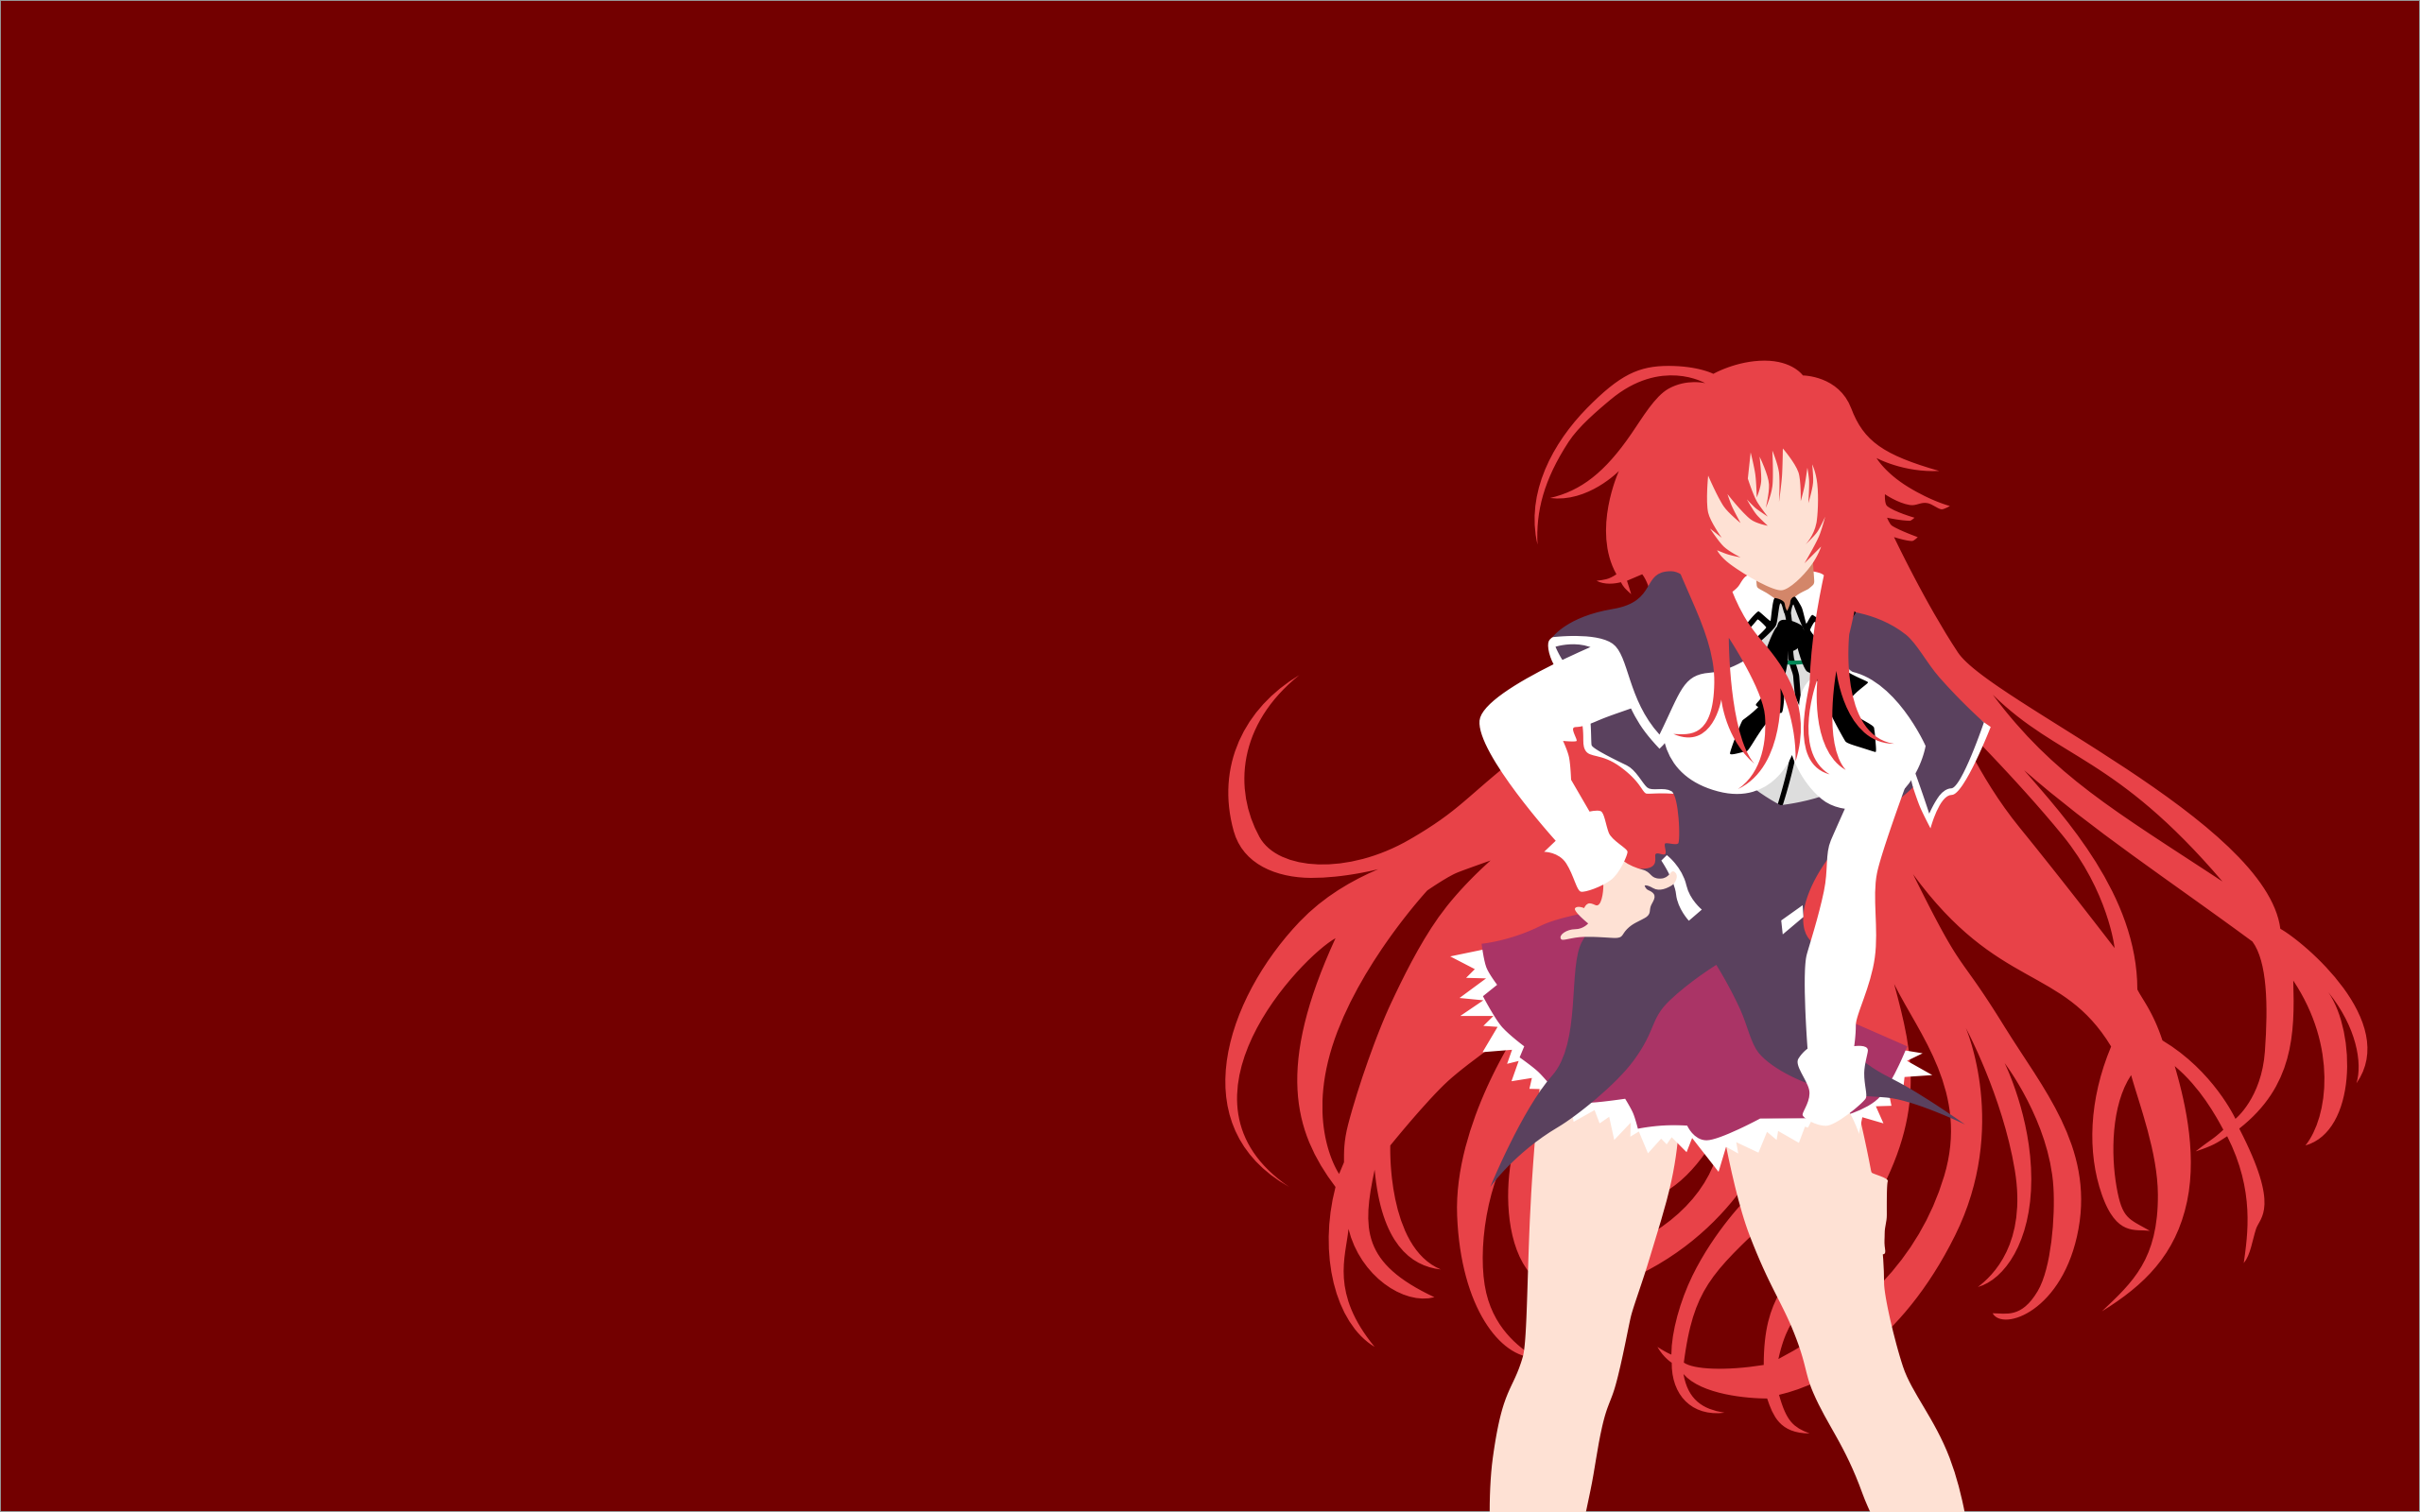 Rias Gremory by AmorphousDeception on DeviantArt